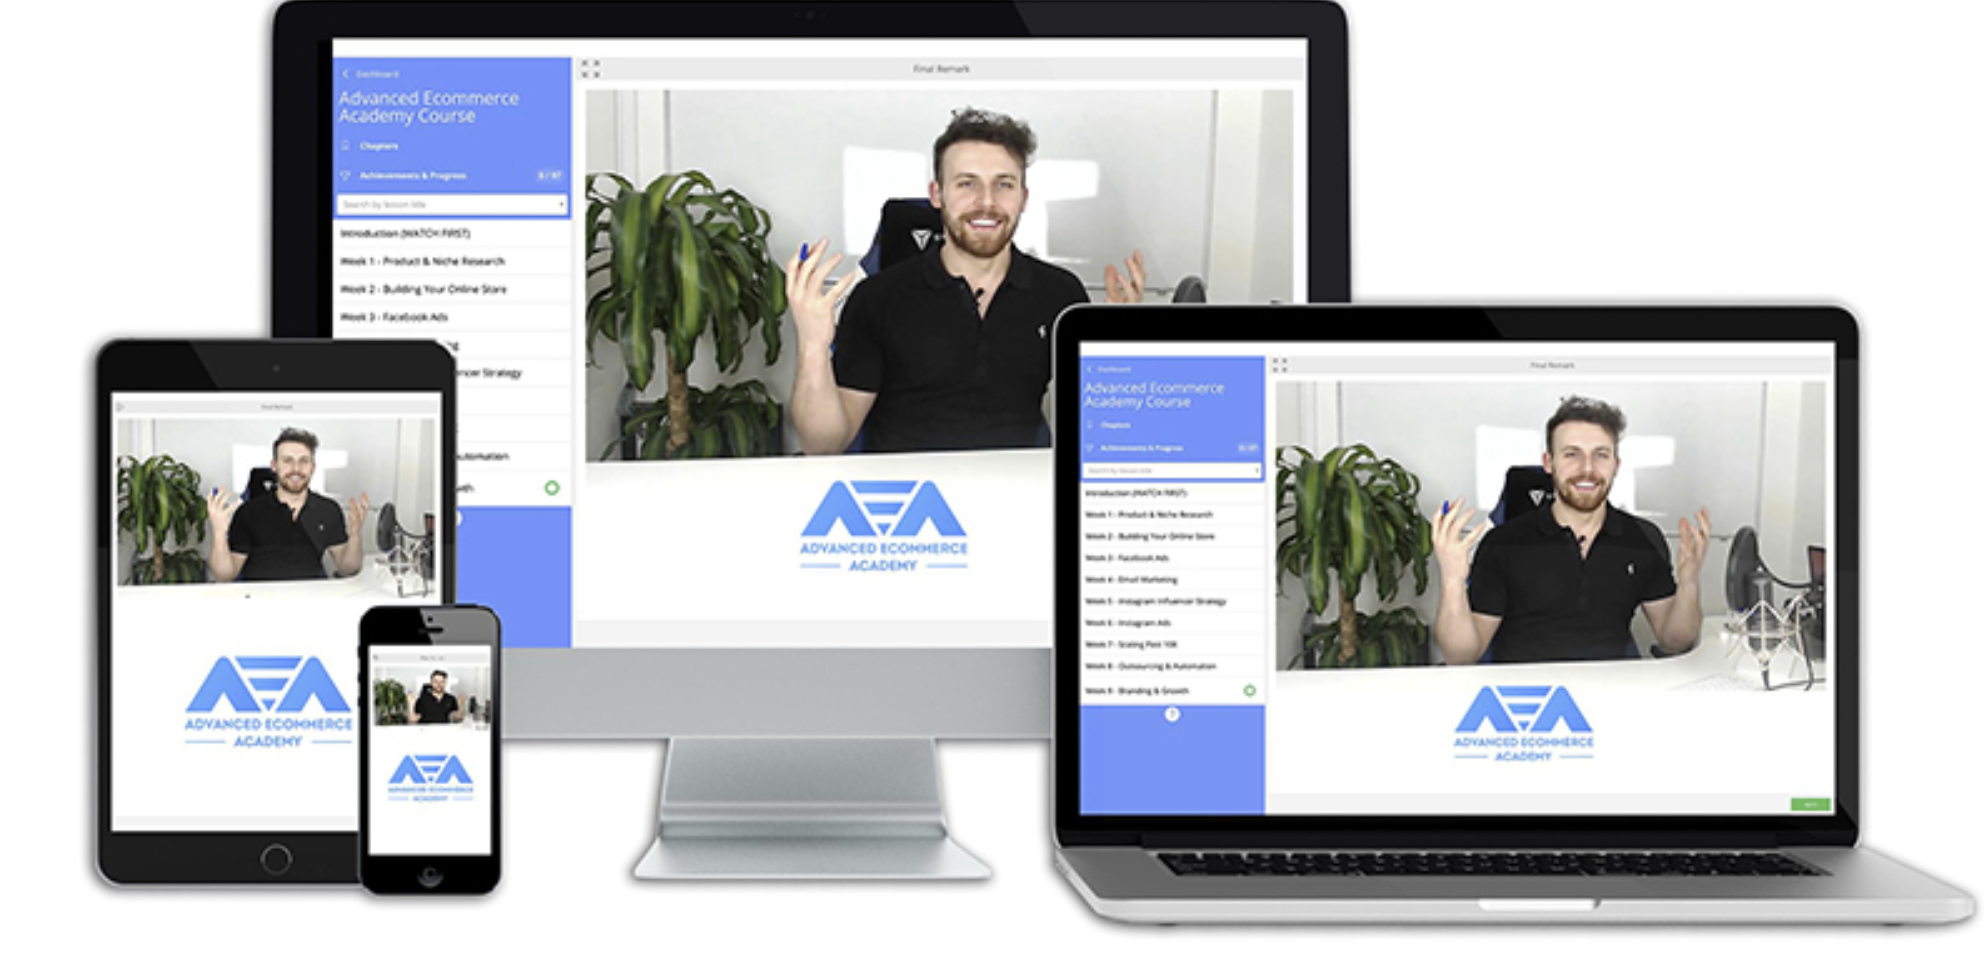 What Is Advanced Ecommerce Academy Course